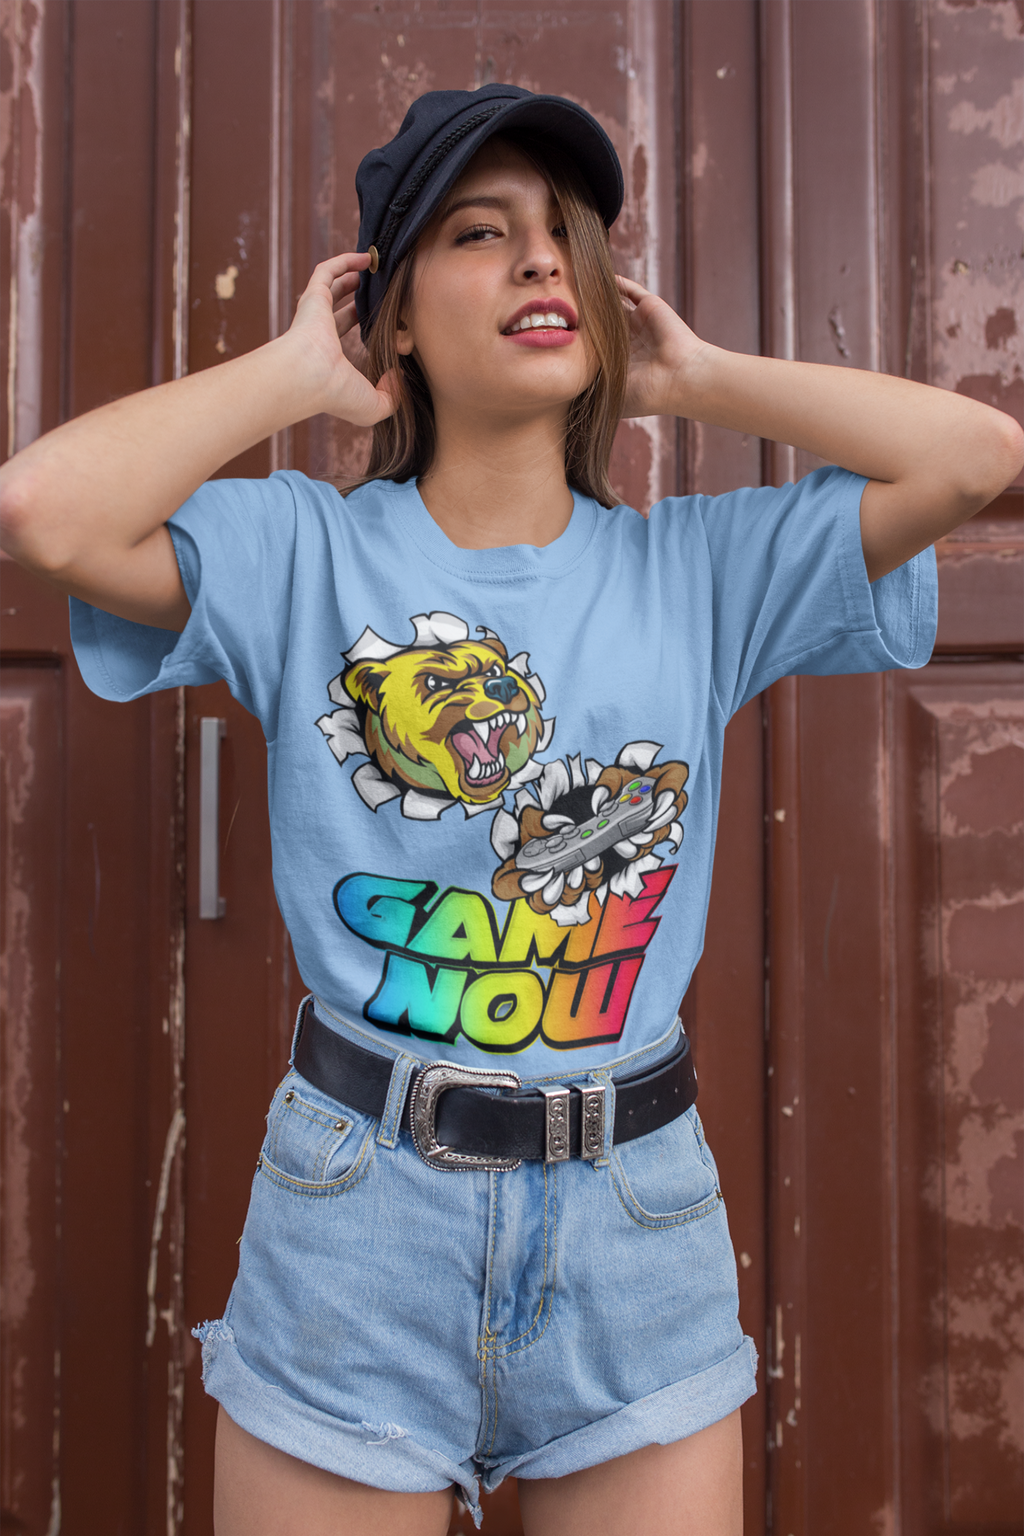 Game on NOW Bear-y Edition Heavyweight Unisex Gaming Tee